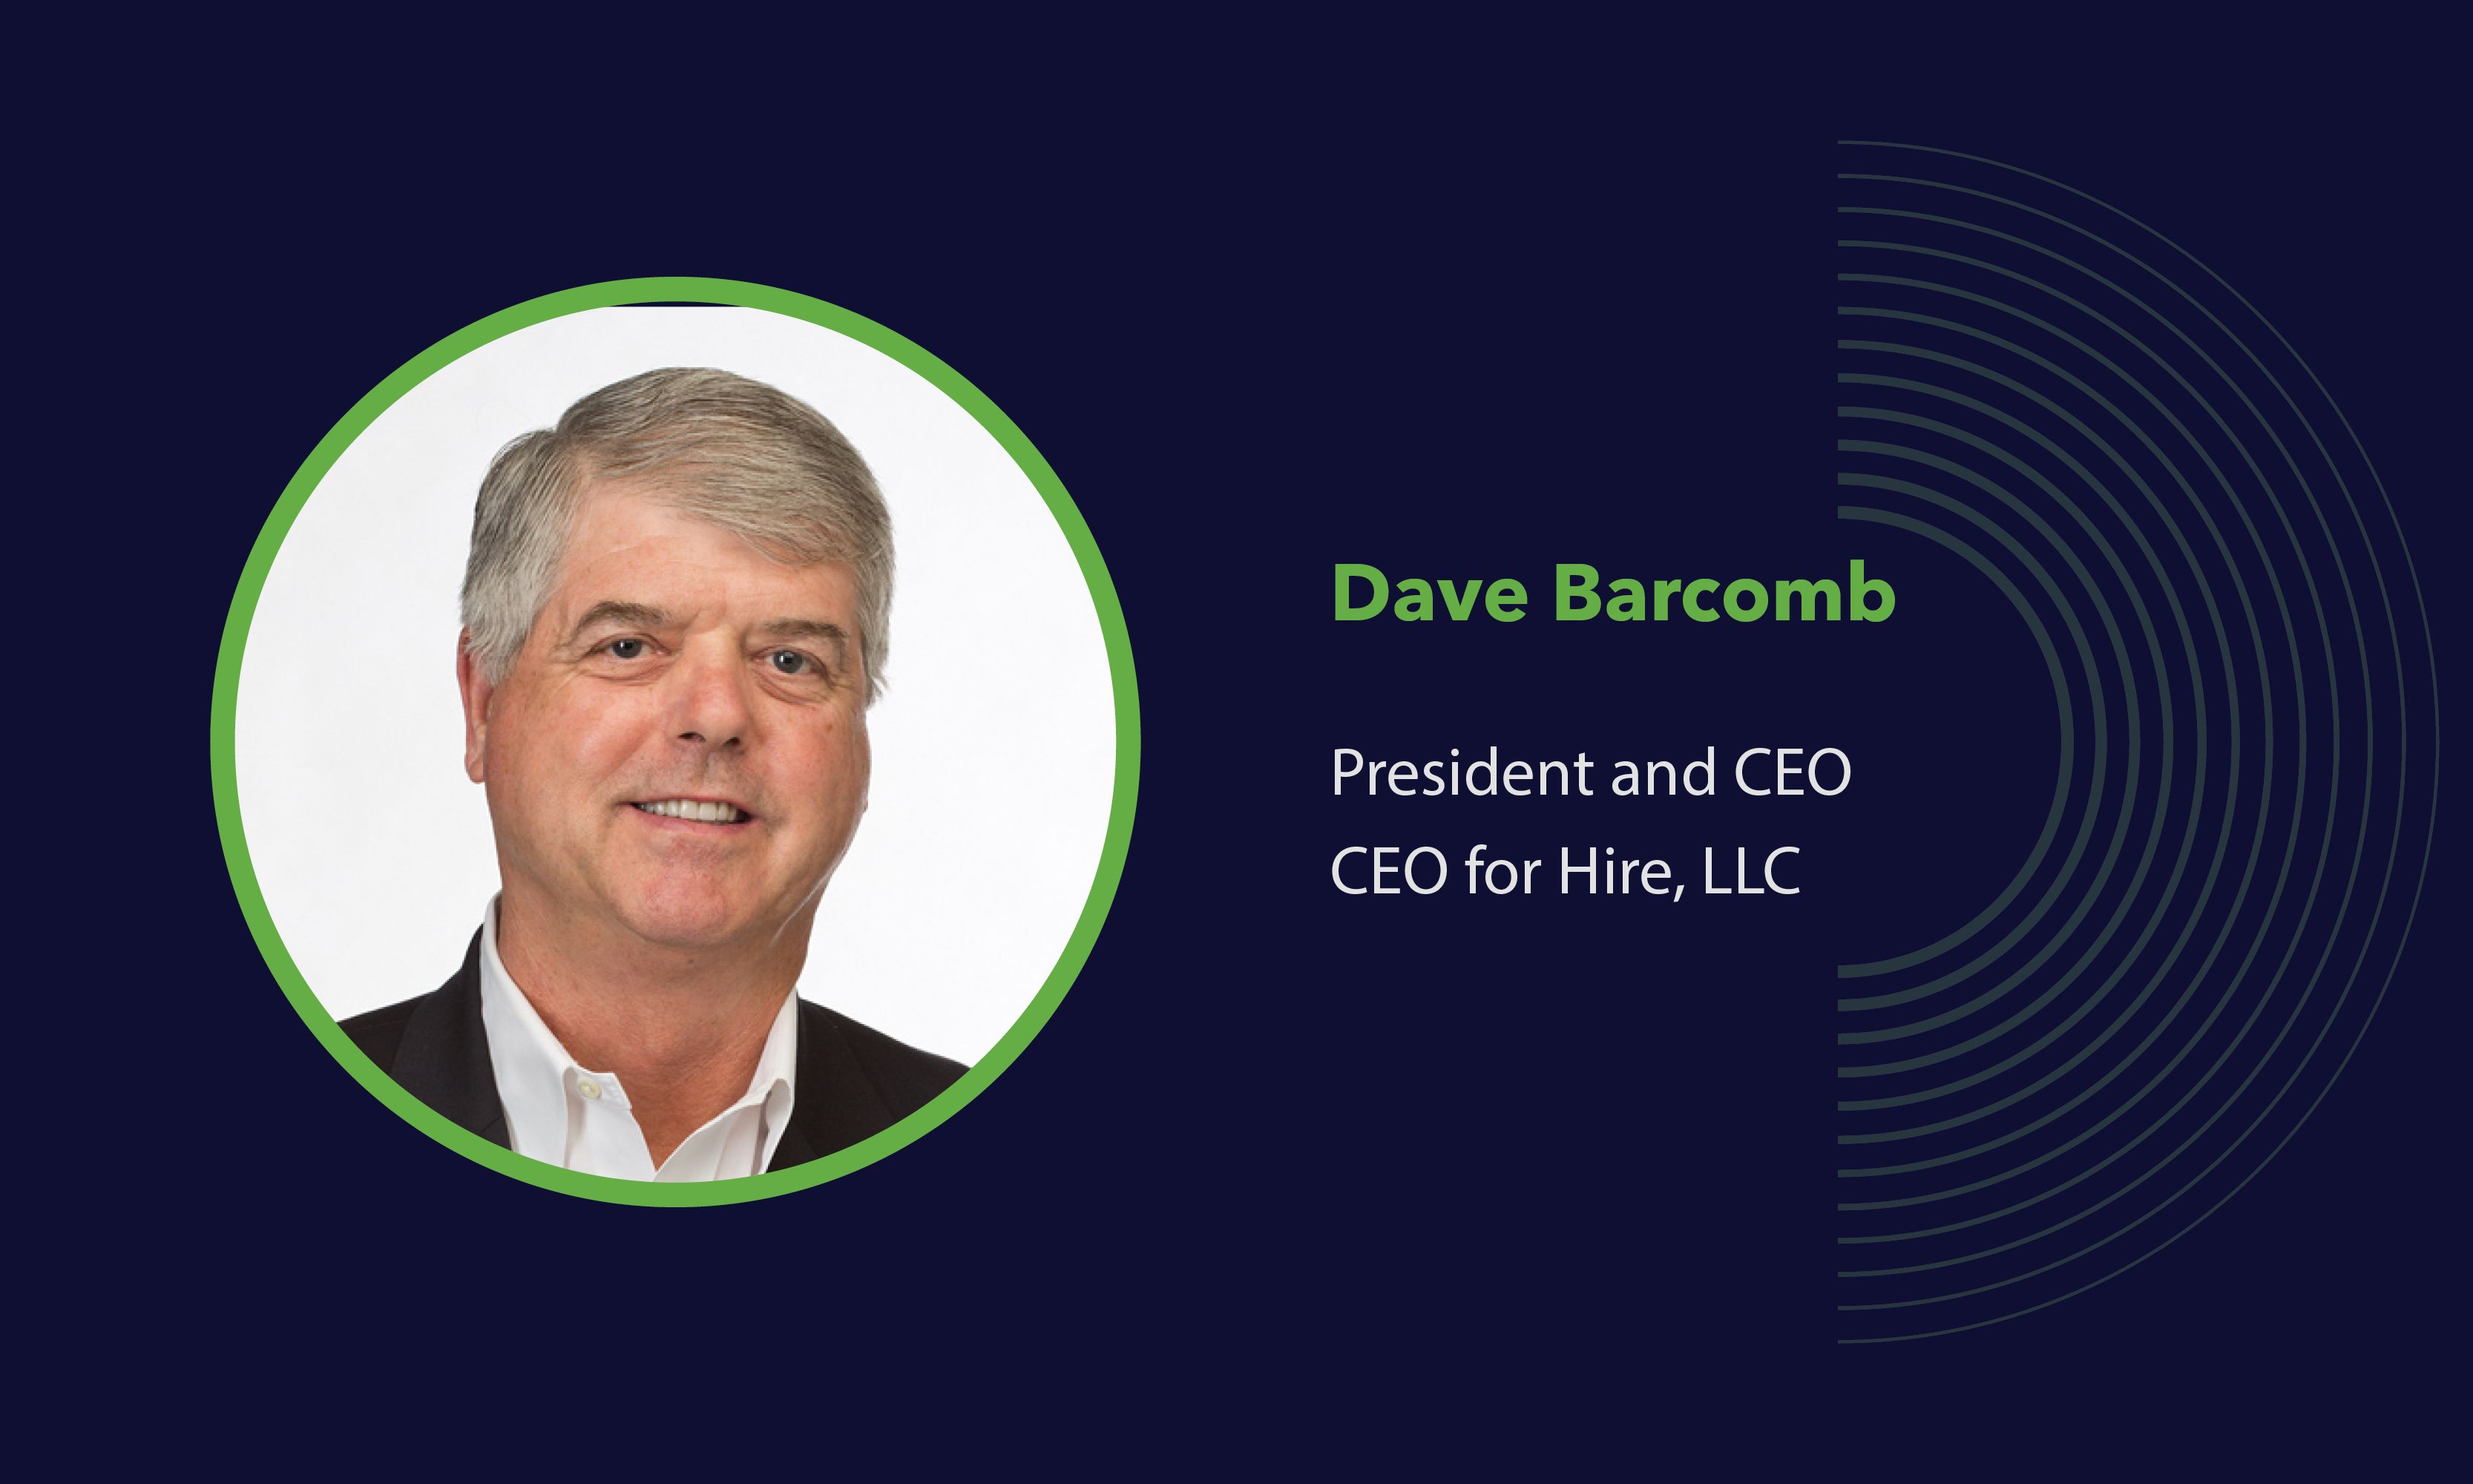 Dave Barcomb from CEO for Hire, LLC